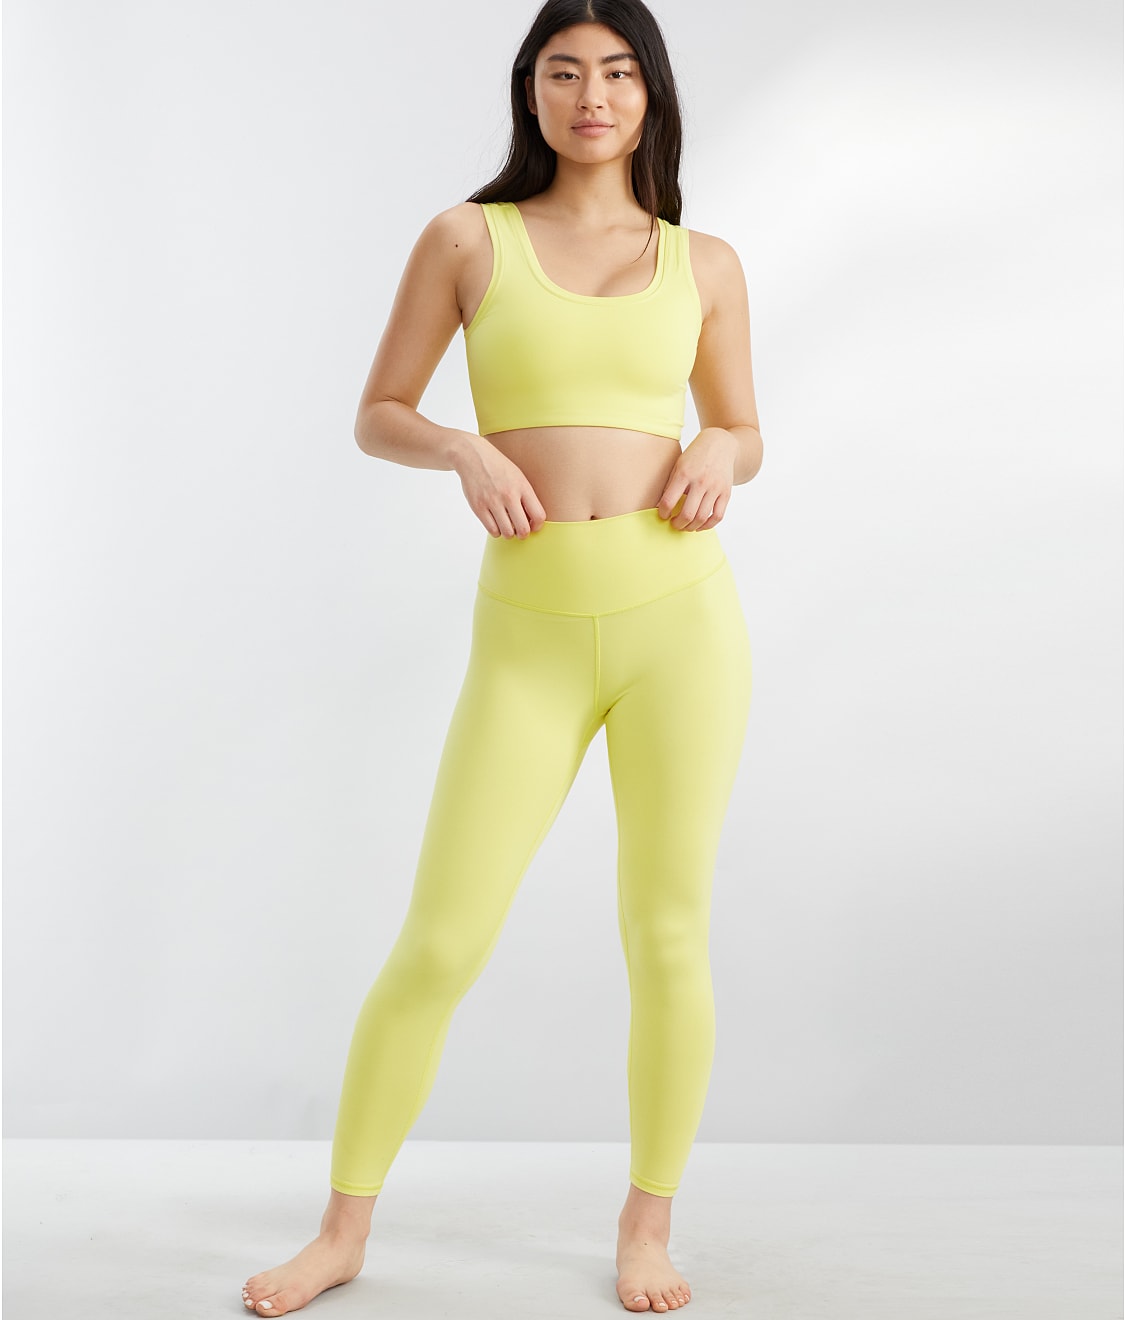 High Rise Active Tights in Lemon Yellow with Contrast Panels & Side Po –  Tradyl